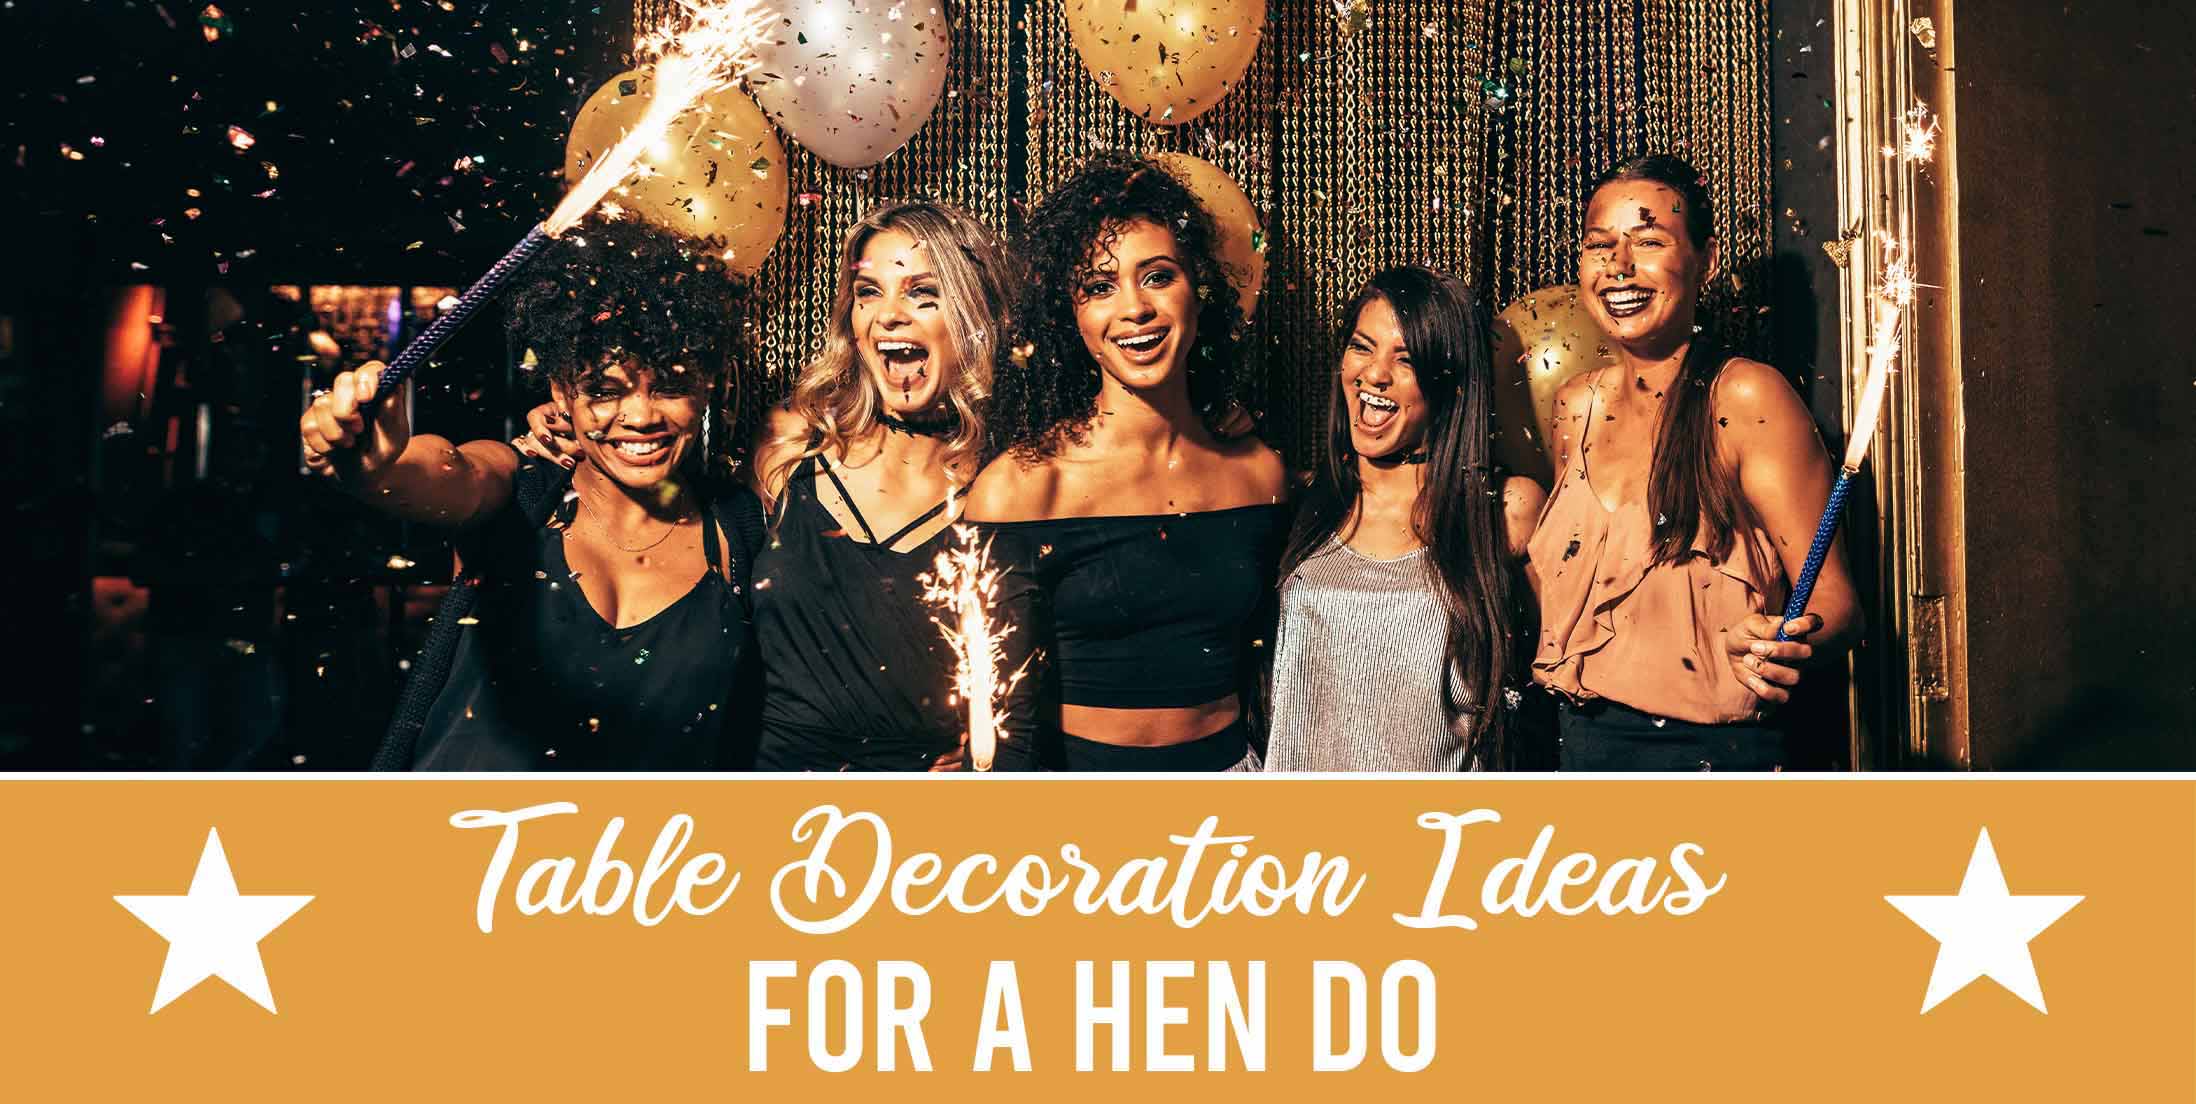 Table Decoration Ideas for a Hen Do